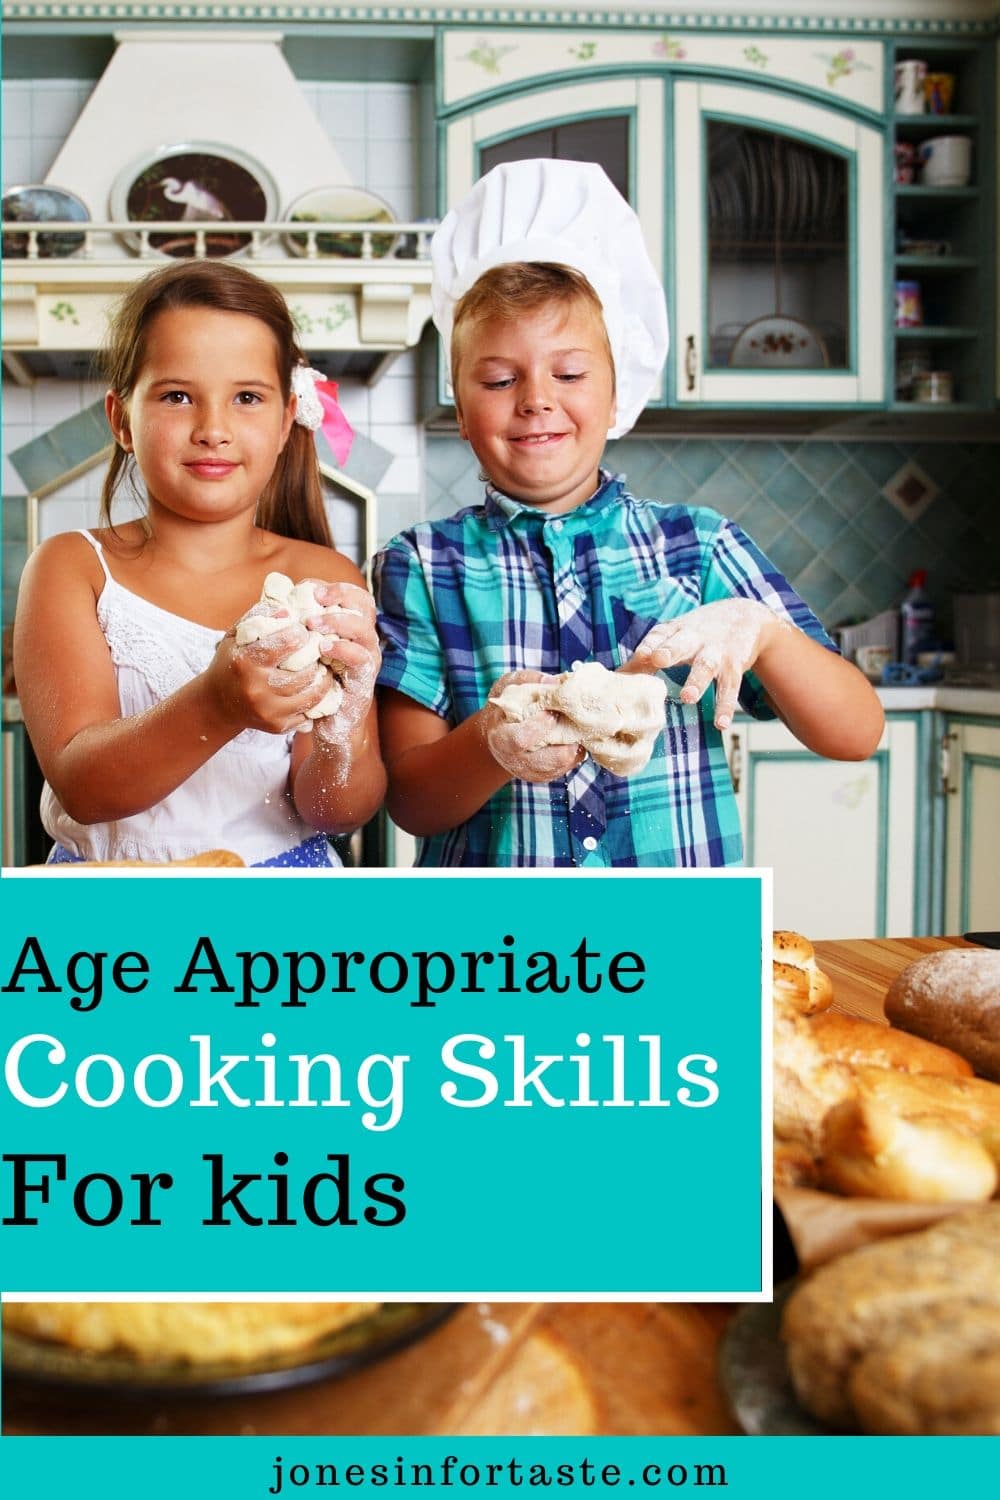 Age Appropriate Cooking Tasks for Kids